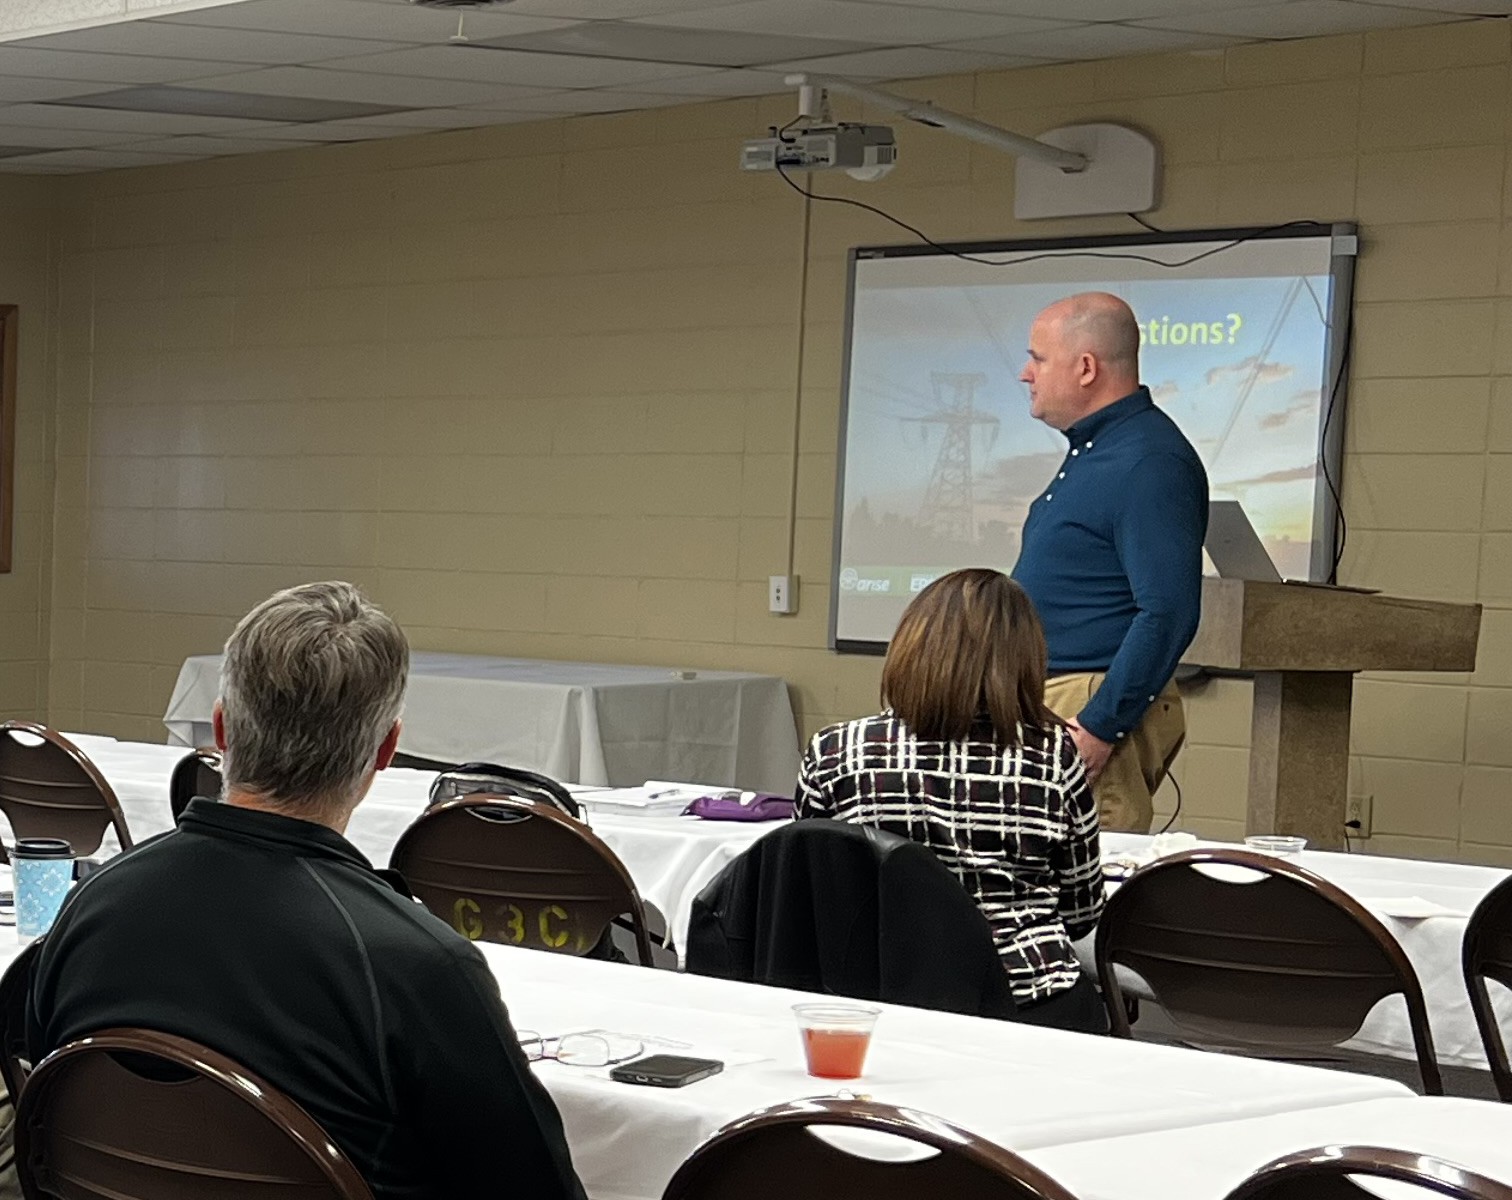 Professor Bergtold leads listening session for ARISE in Finney County Kansas